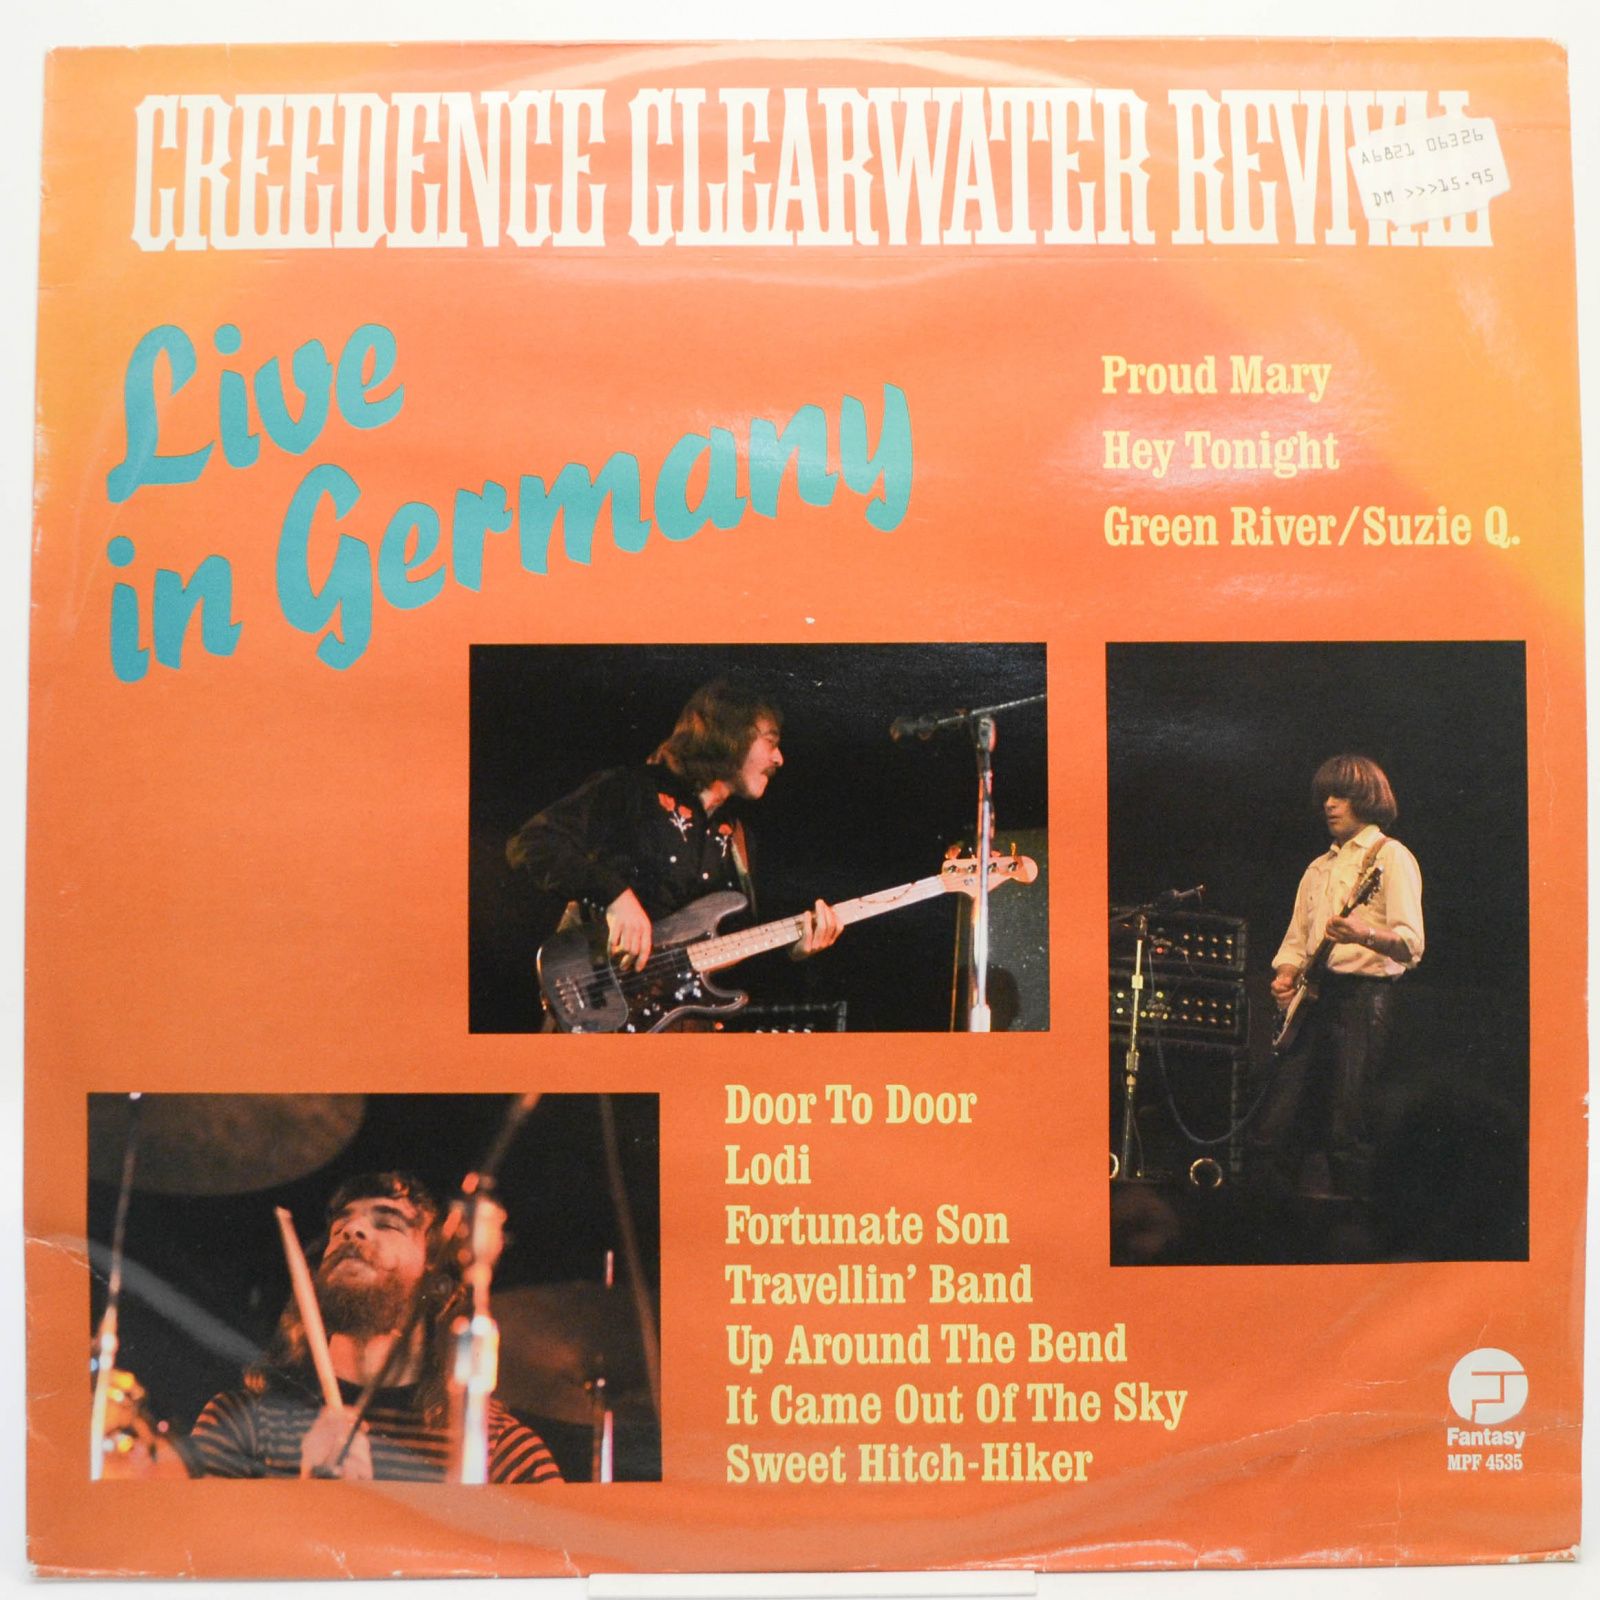 Creedence Clearwater Revival — Live In Germany, 1976